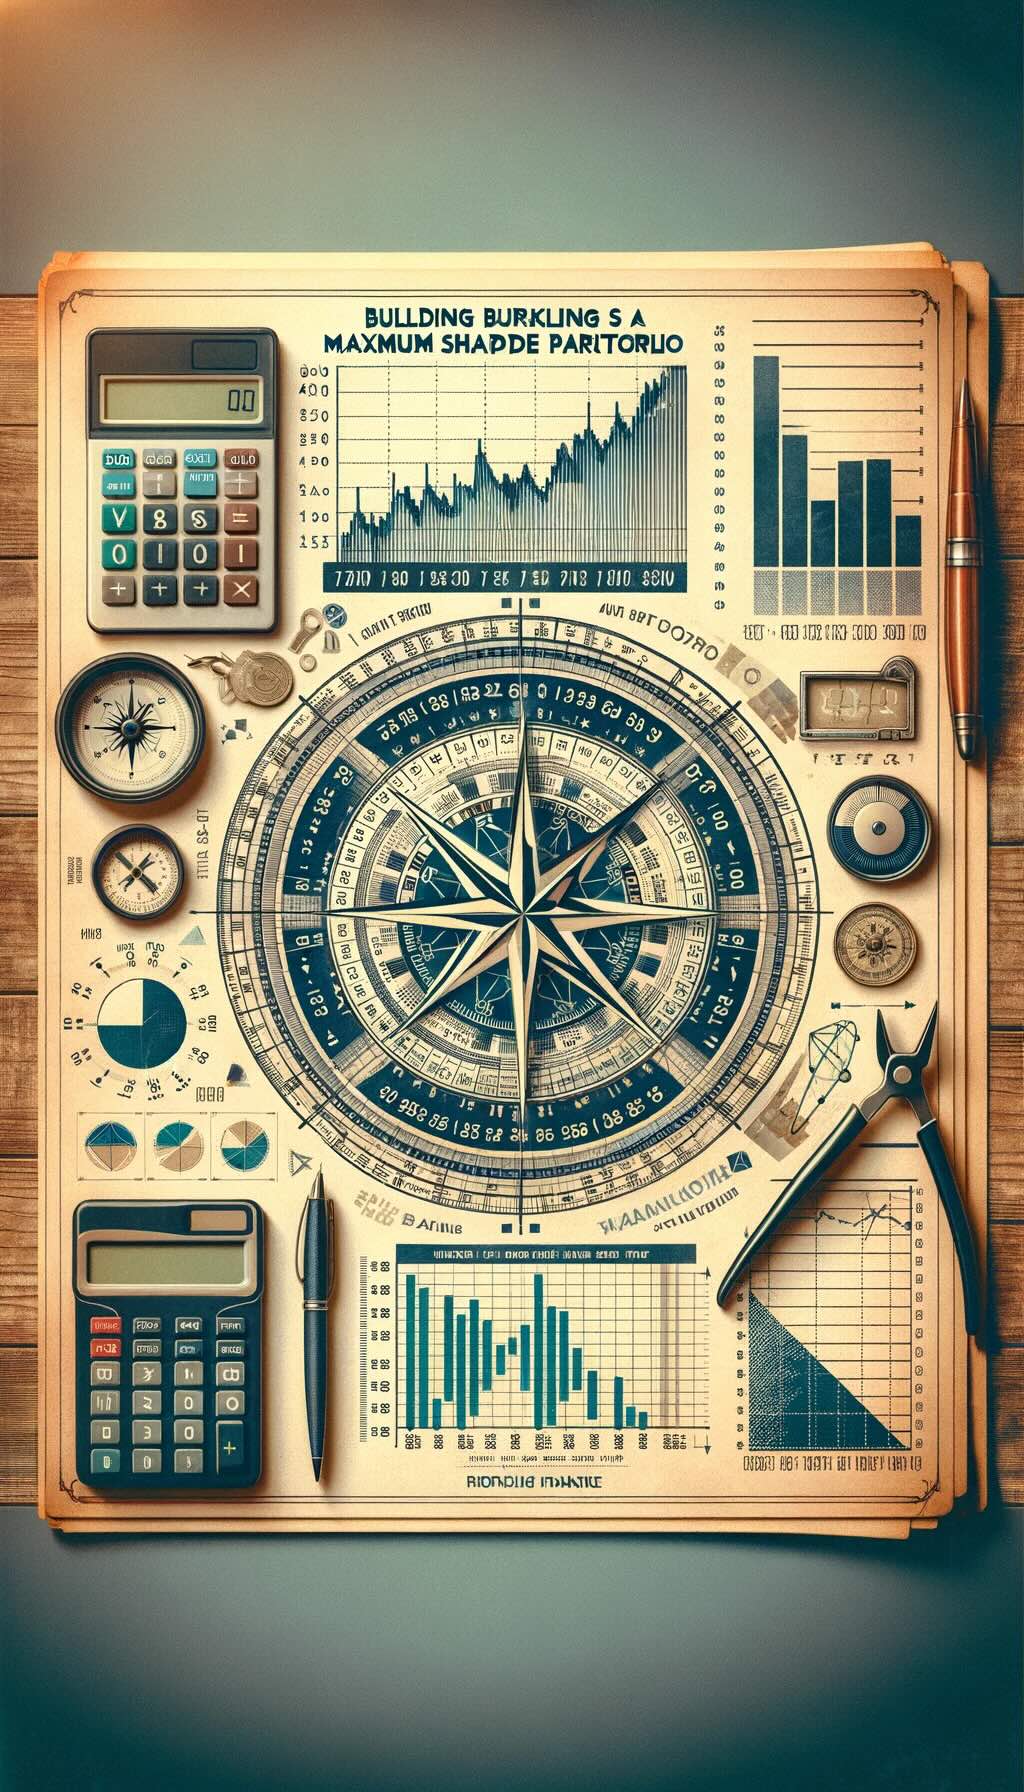 Concept of building a Maximum Sharpe Ratio Portfolio. The artwork includes financial elements such as graphs, calculators, and stock market charts, along with imagery like a compass and a balance scale, representing the analytical process of portfolio optimization and the search for the ideal balance between risk and return